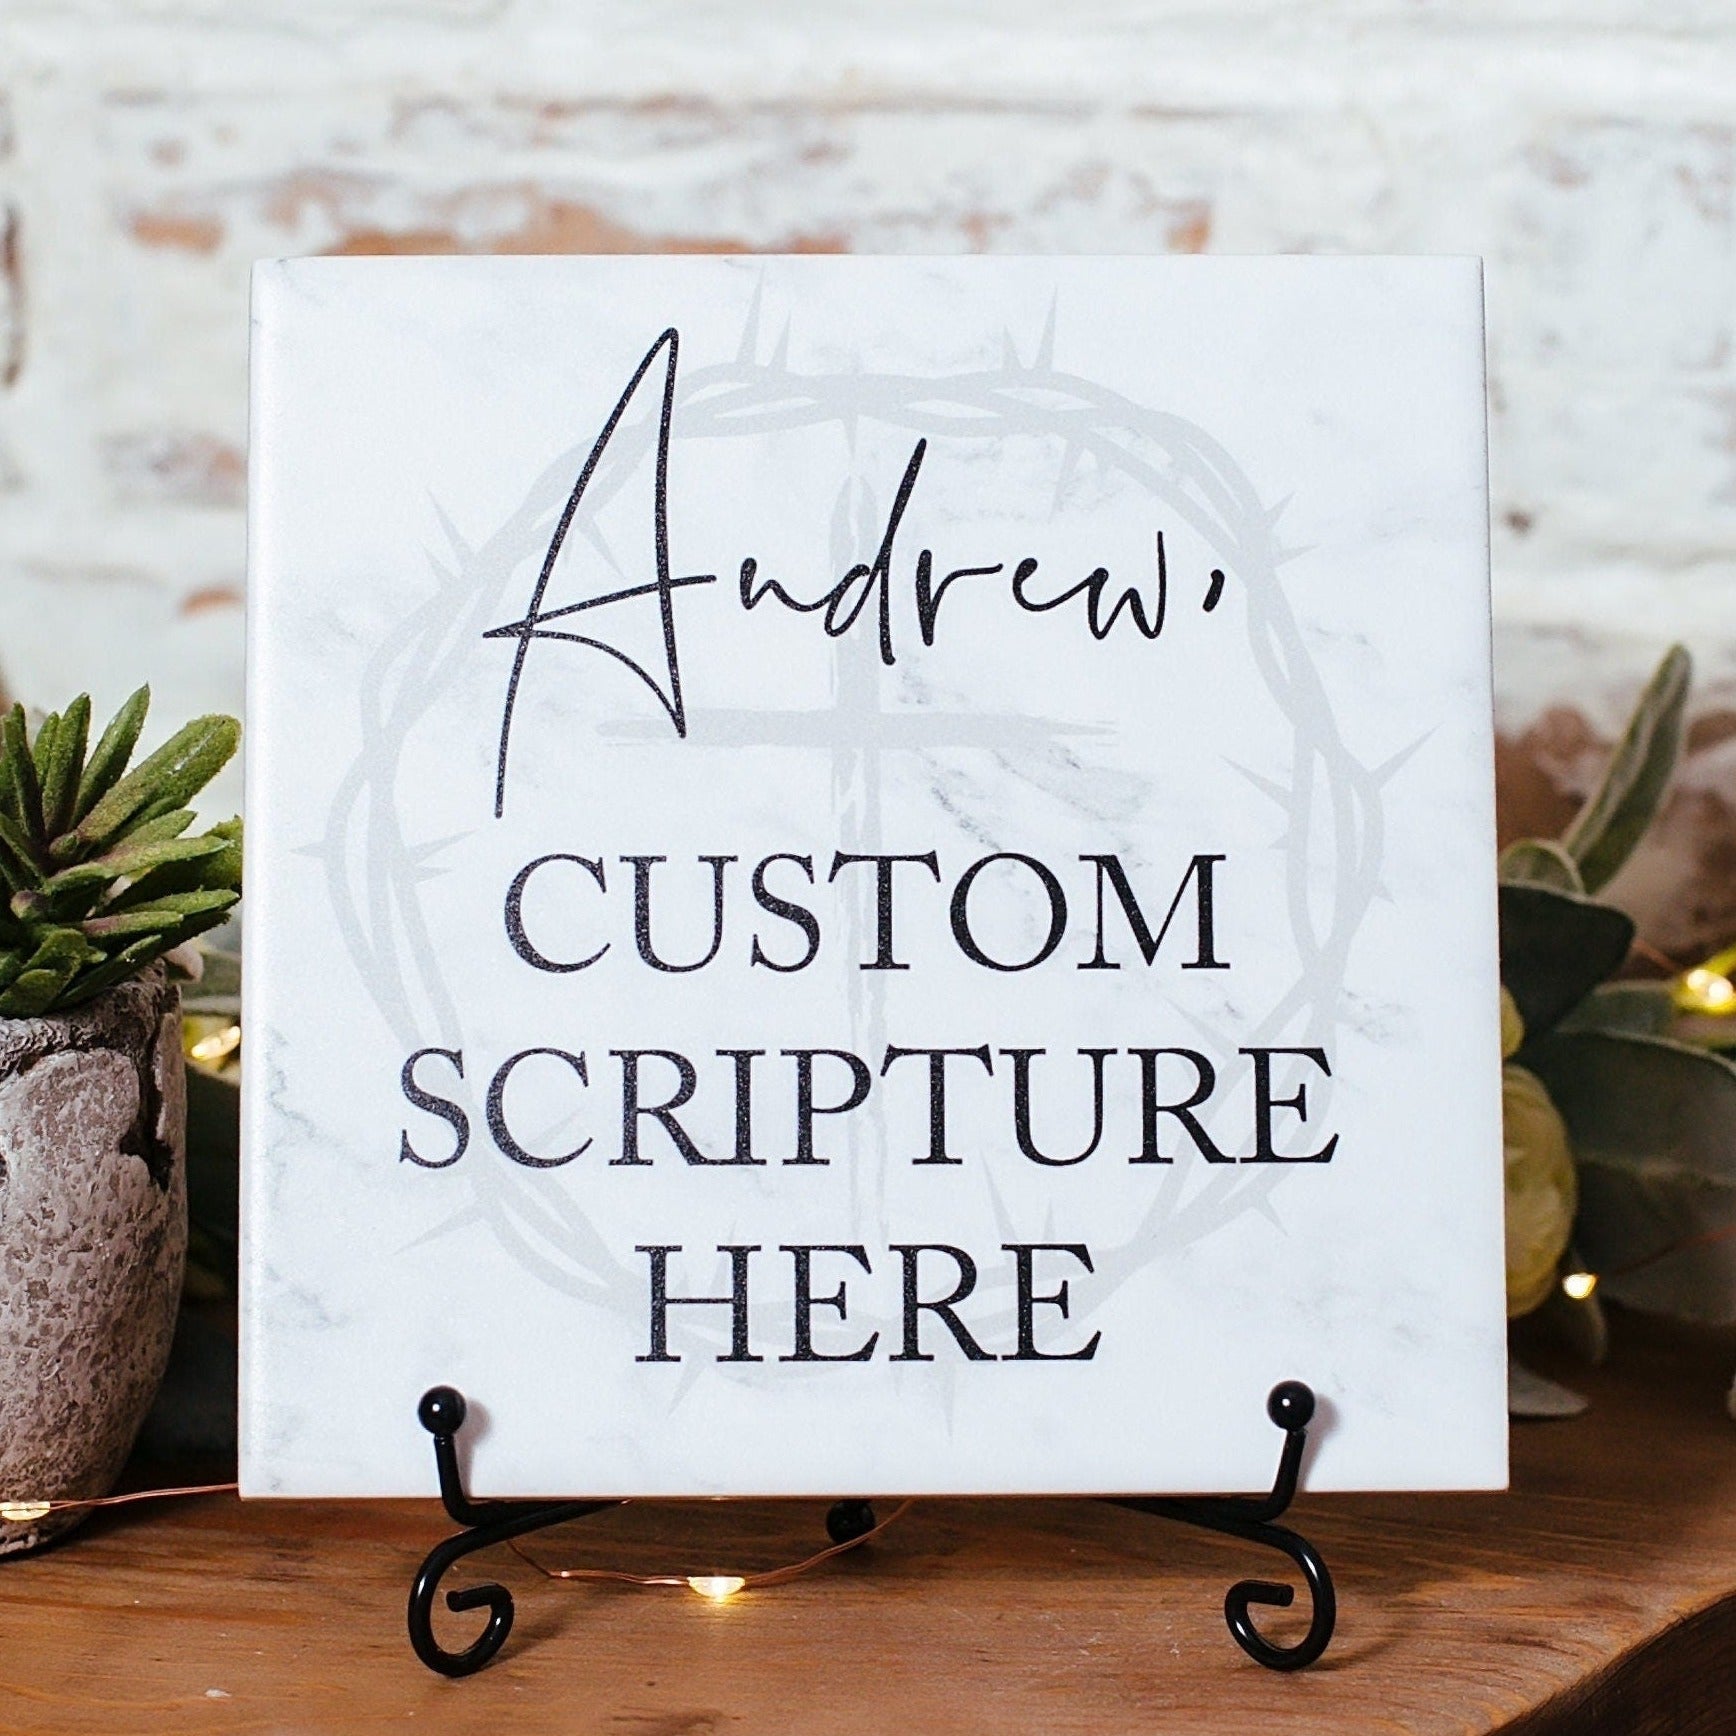 Personalized Custom Bible Verse SCRIPTURE Christian Gifts For Men Teens Boys, Encouraging Sign, Christening Christening Graduation Ideas